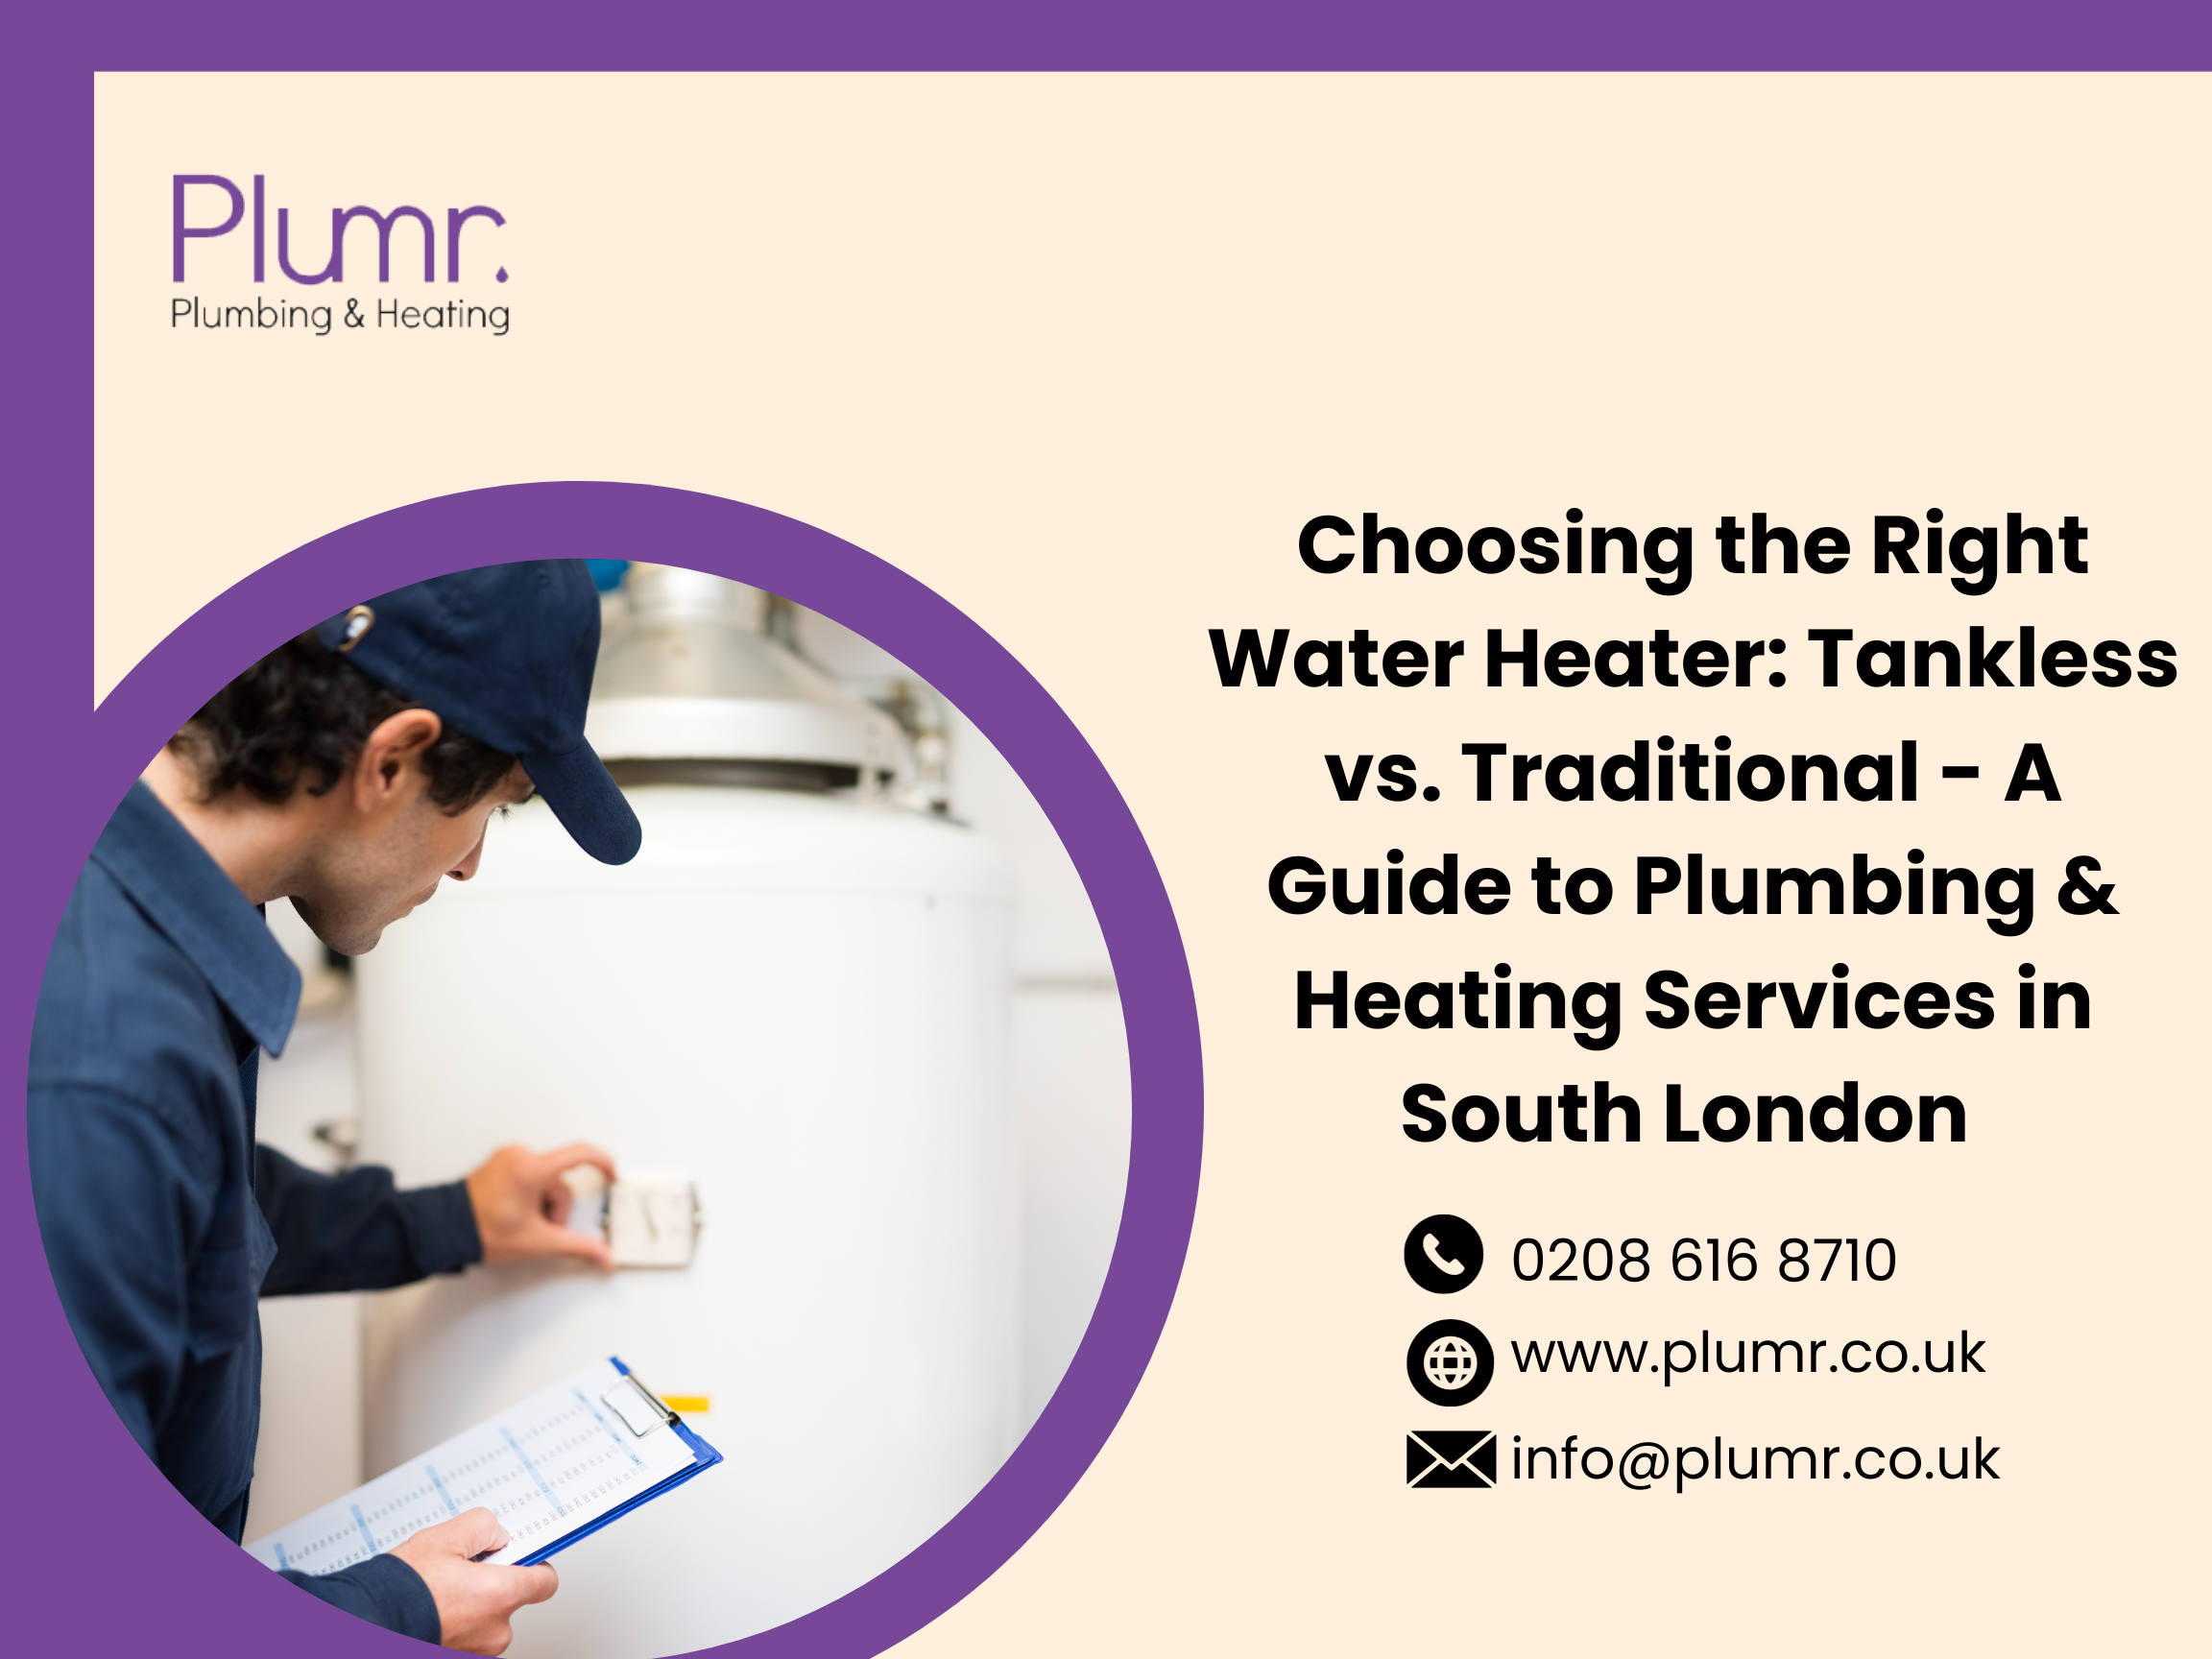 Plumbing & Heating Services in South London